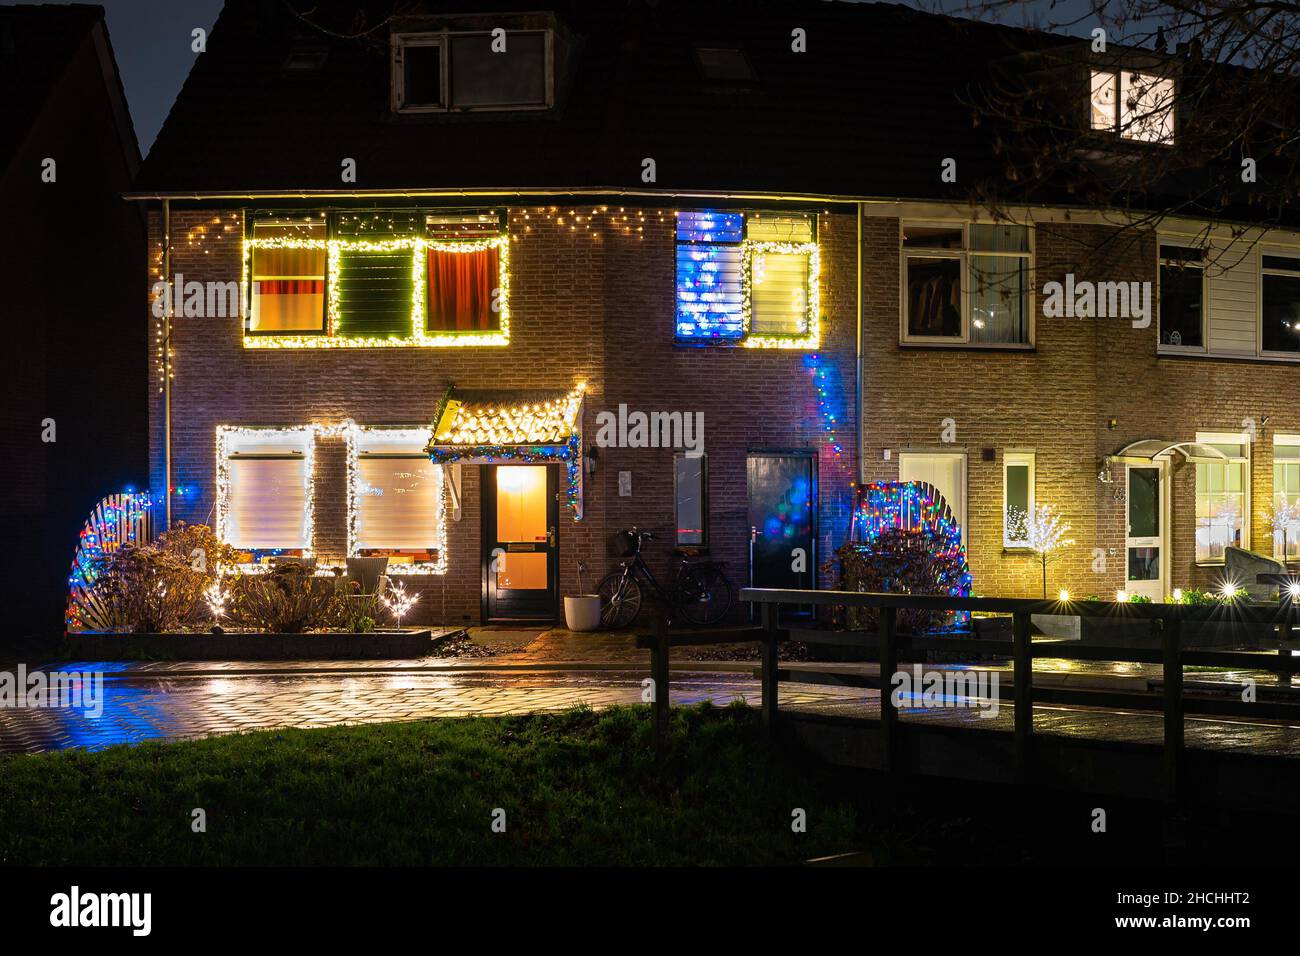 Night view of Christmas decoration on the front of a house in a Dutch town Stock Photo